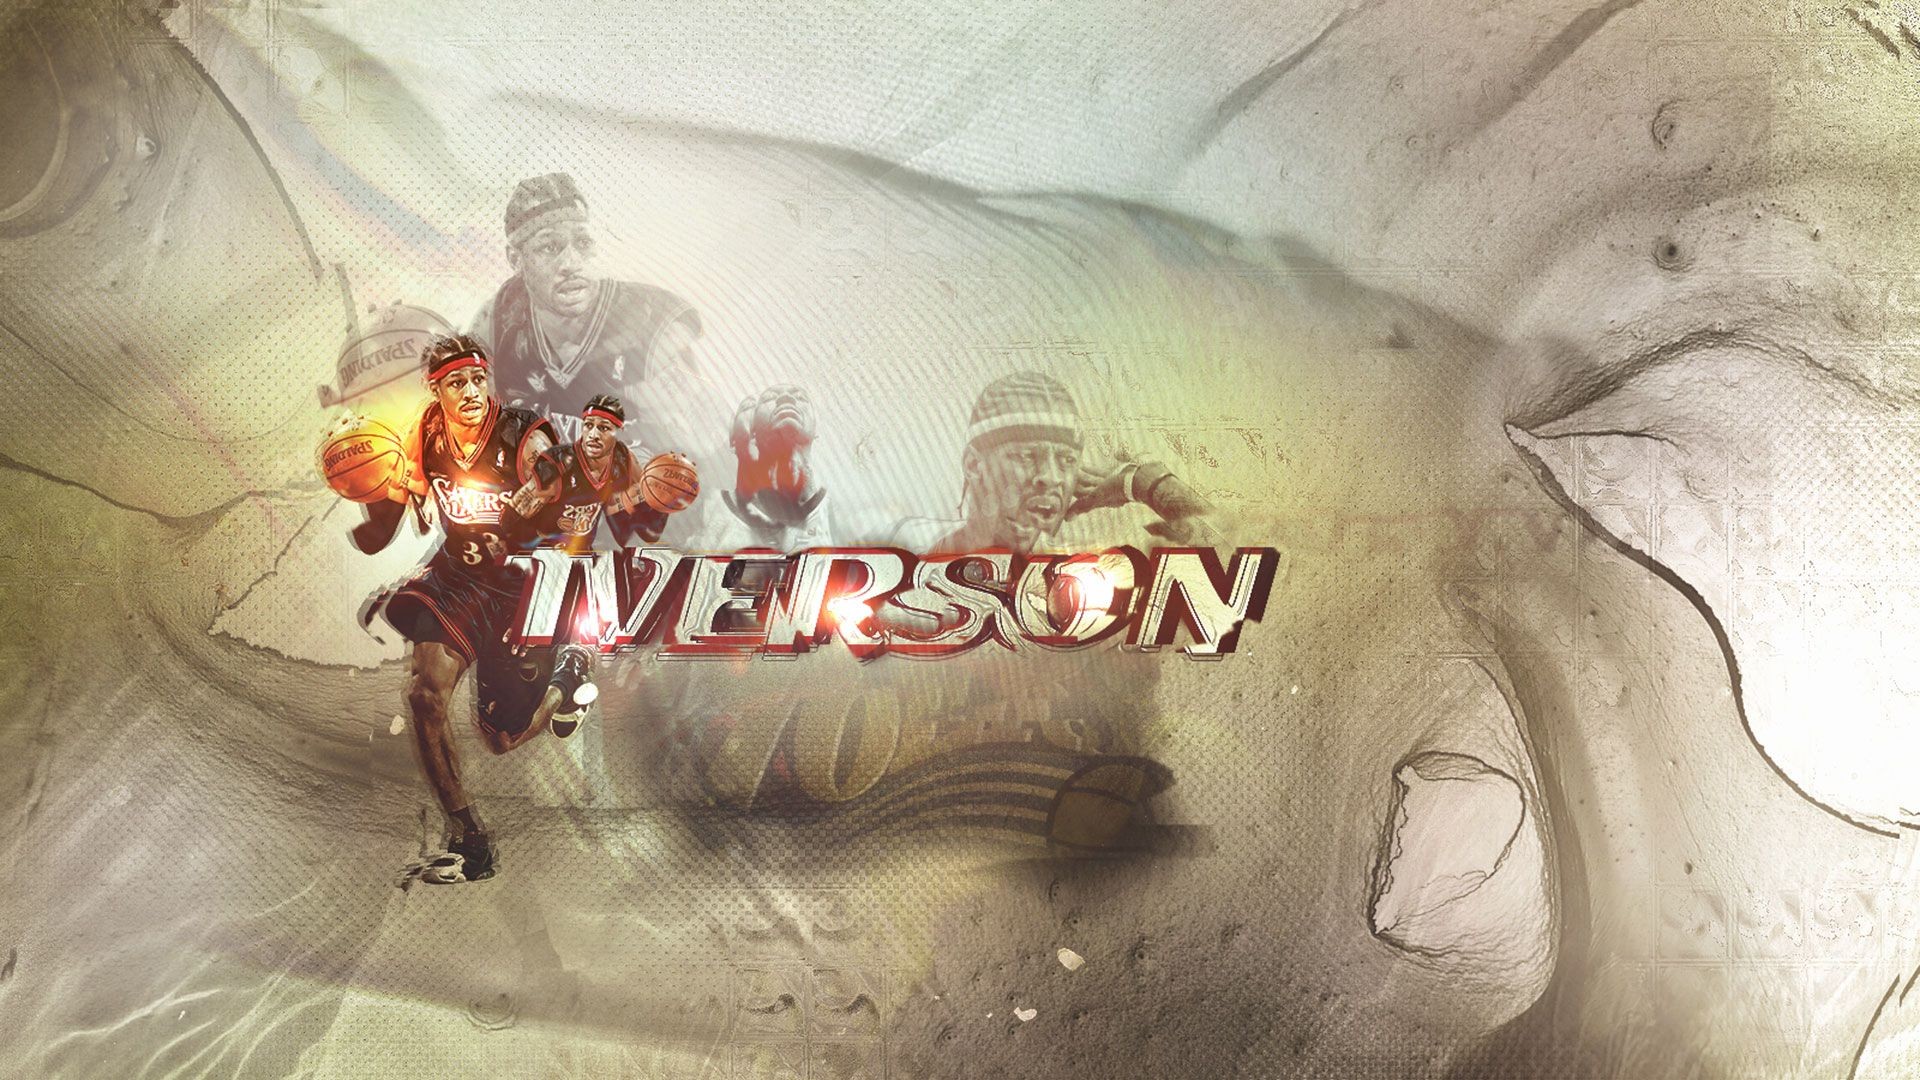 1920x1080 Allen Iverson 1080p Wallpaper http://wallpapers-and-backgrounds.net/